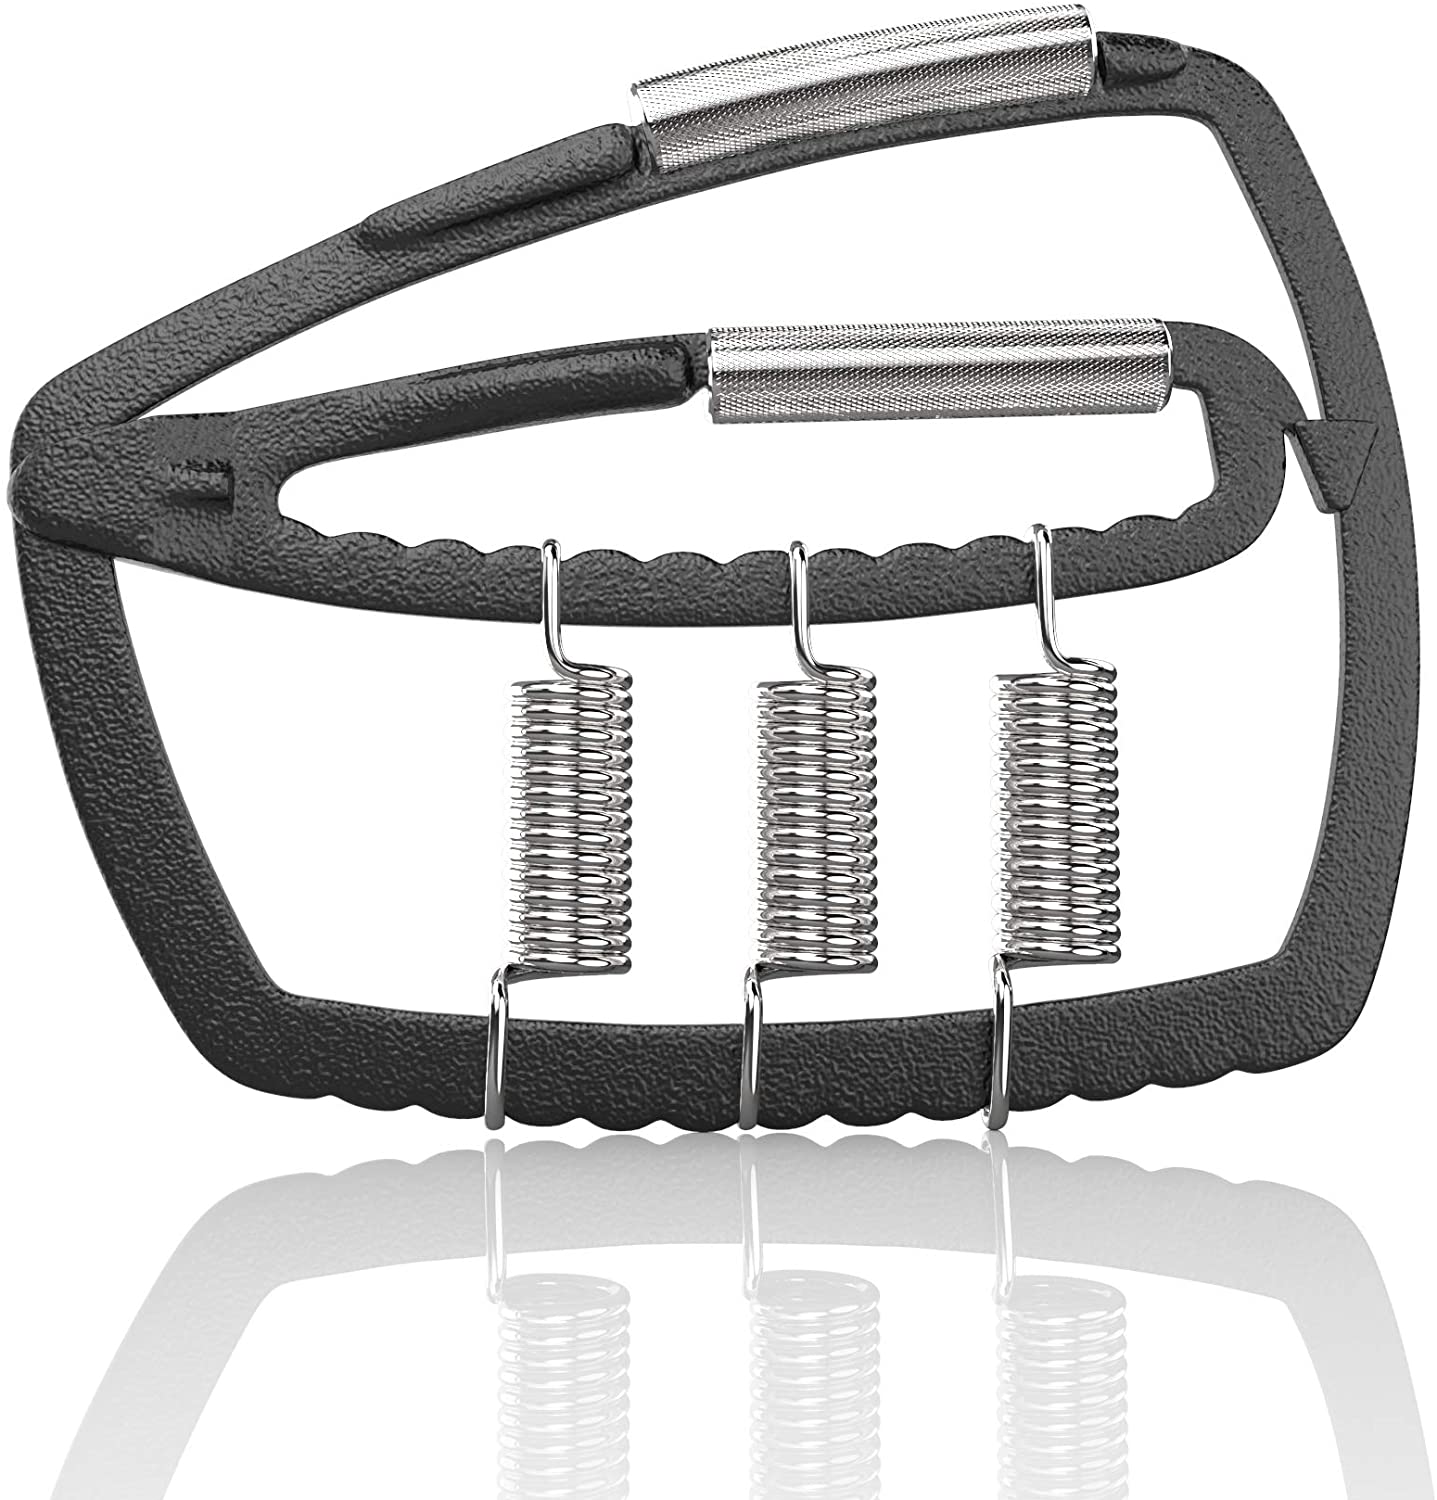 Hand Grip Strengthener With 3 Springs